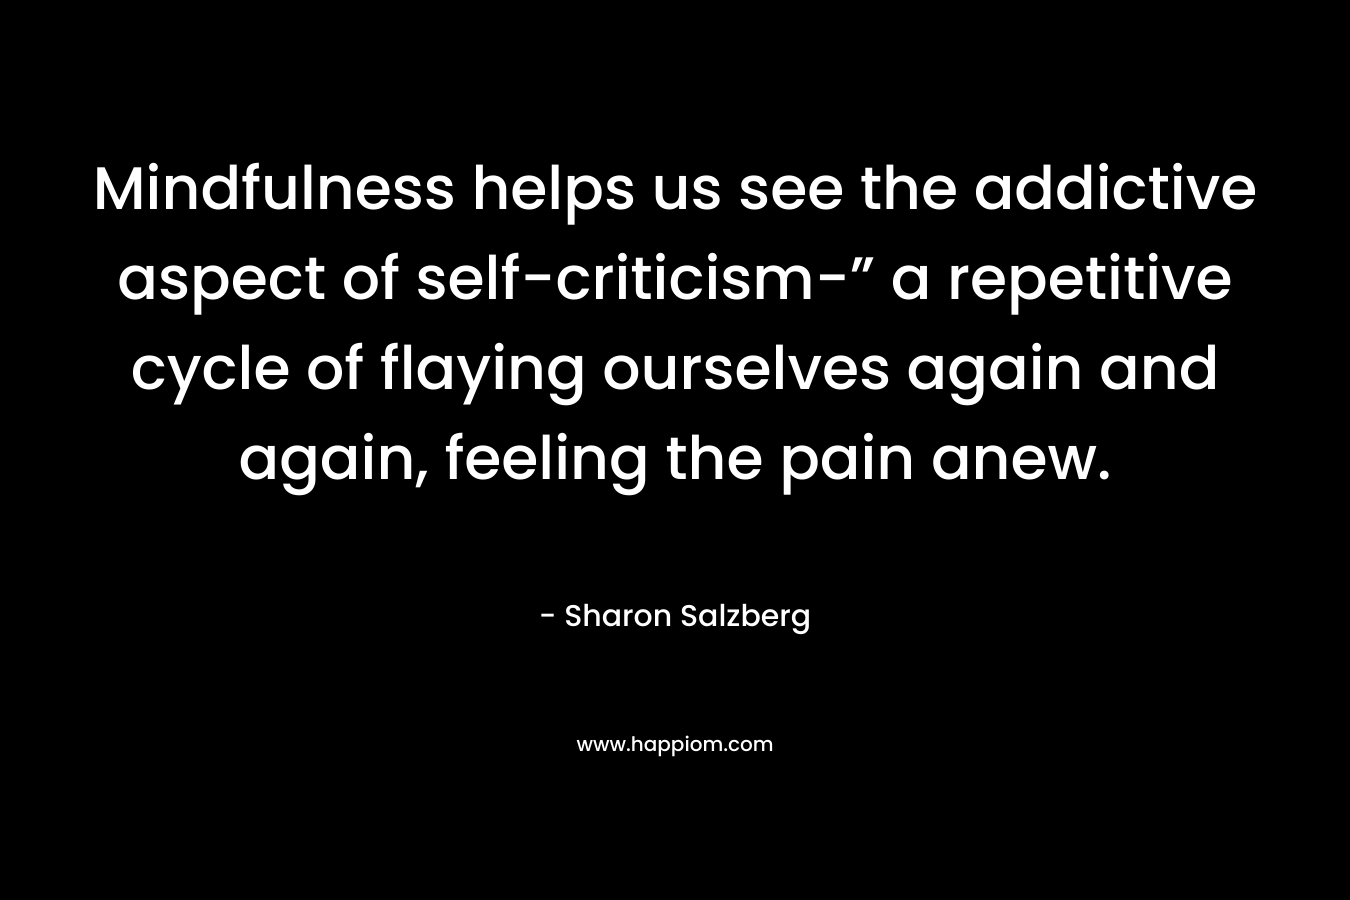 Mindfulness helps us see the addictive aspect of self-criticism-” a repetitive cycle of flaying ourselves again and again, feeling the pain anew.